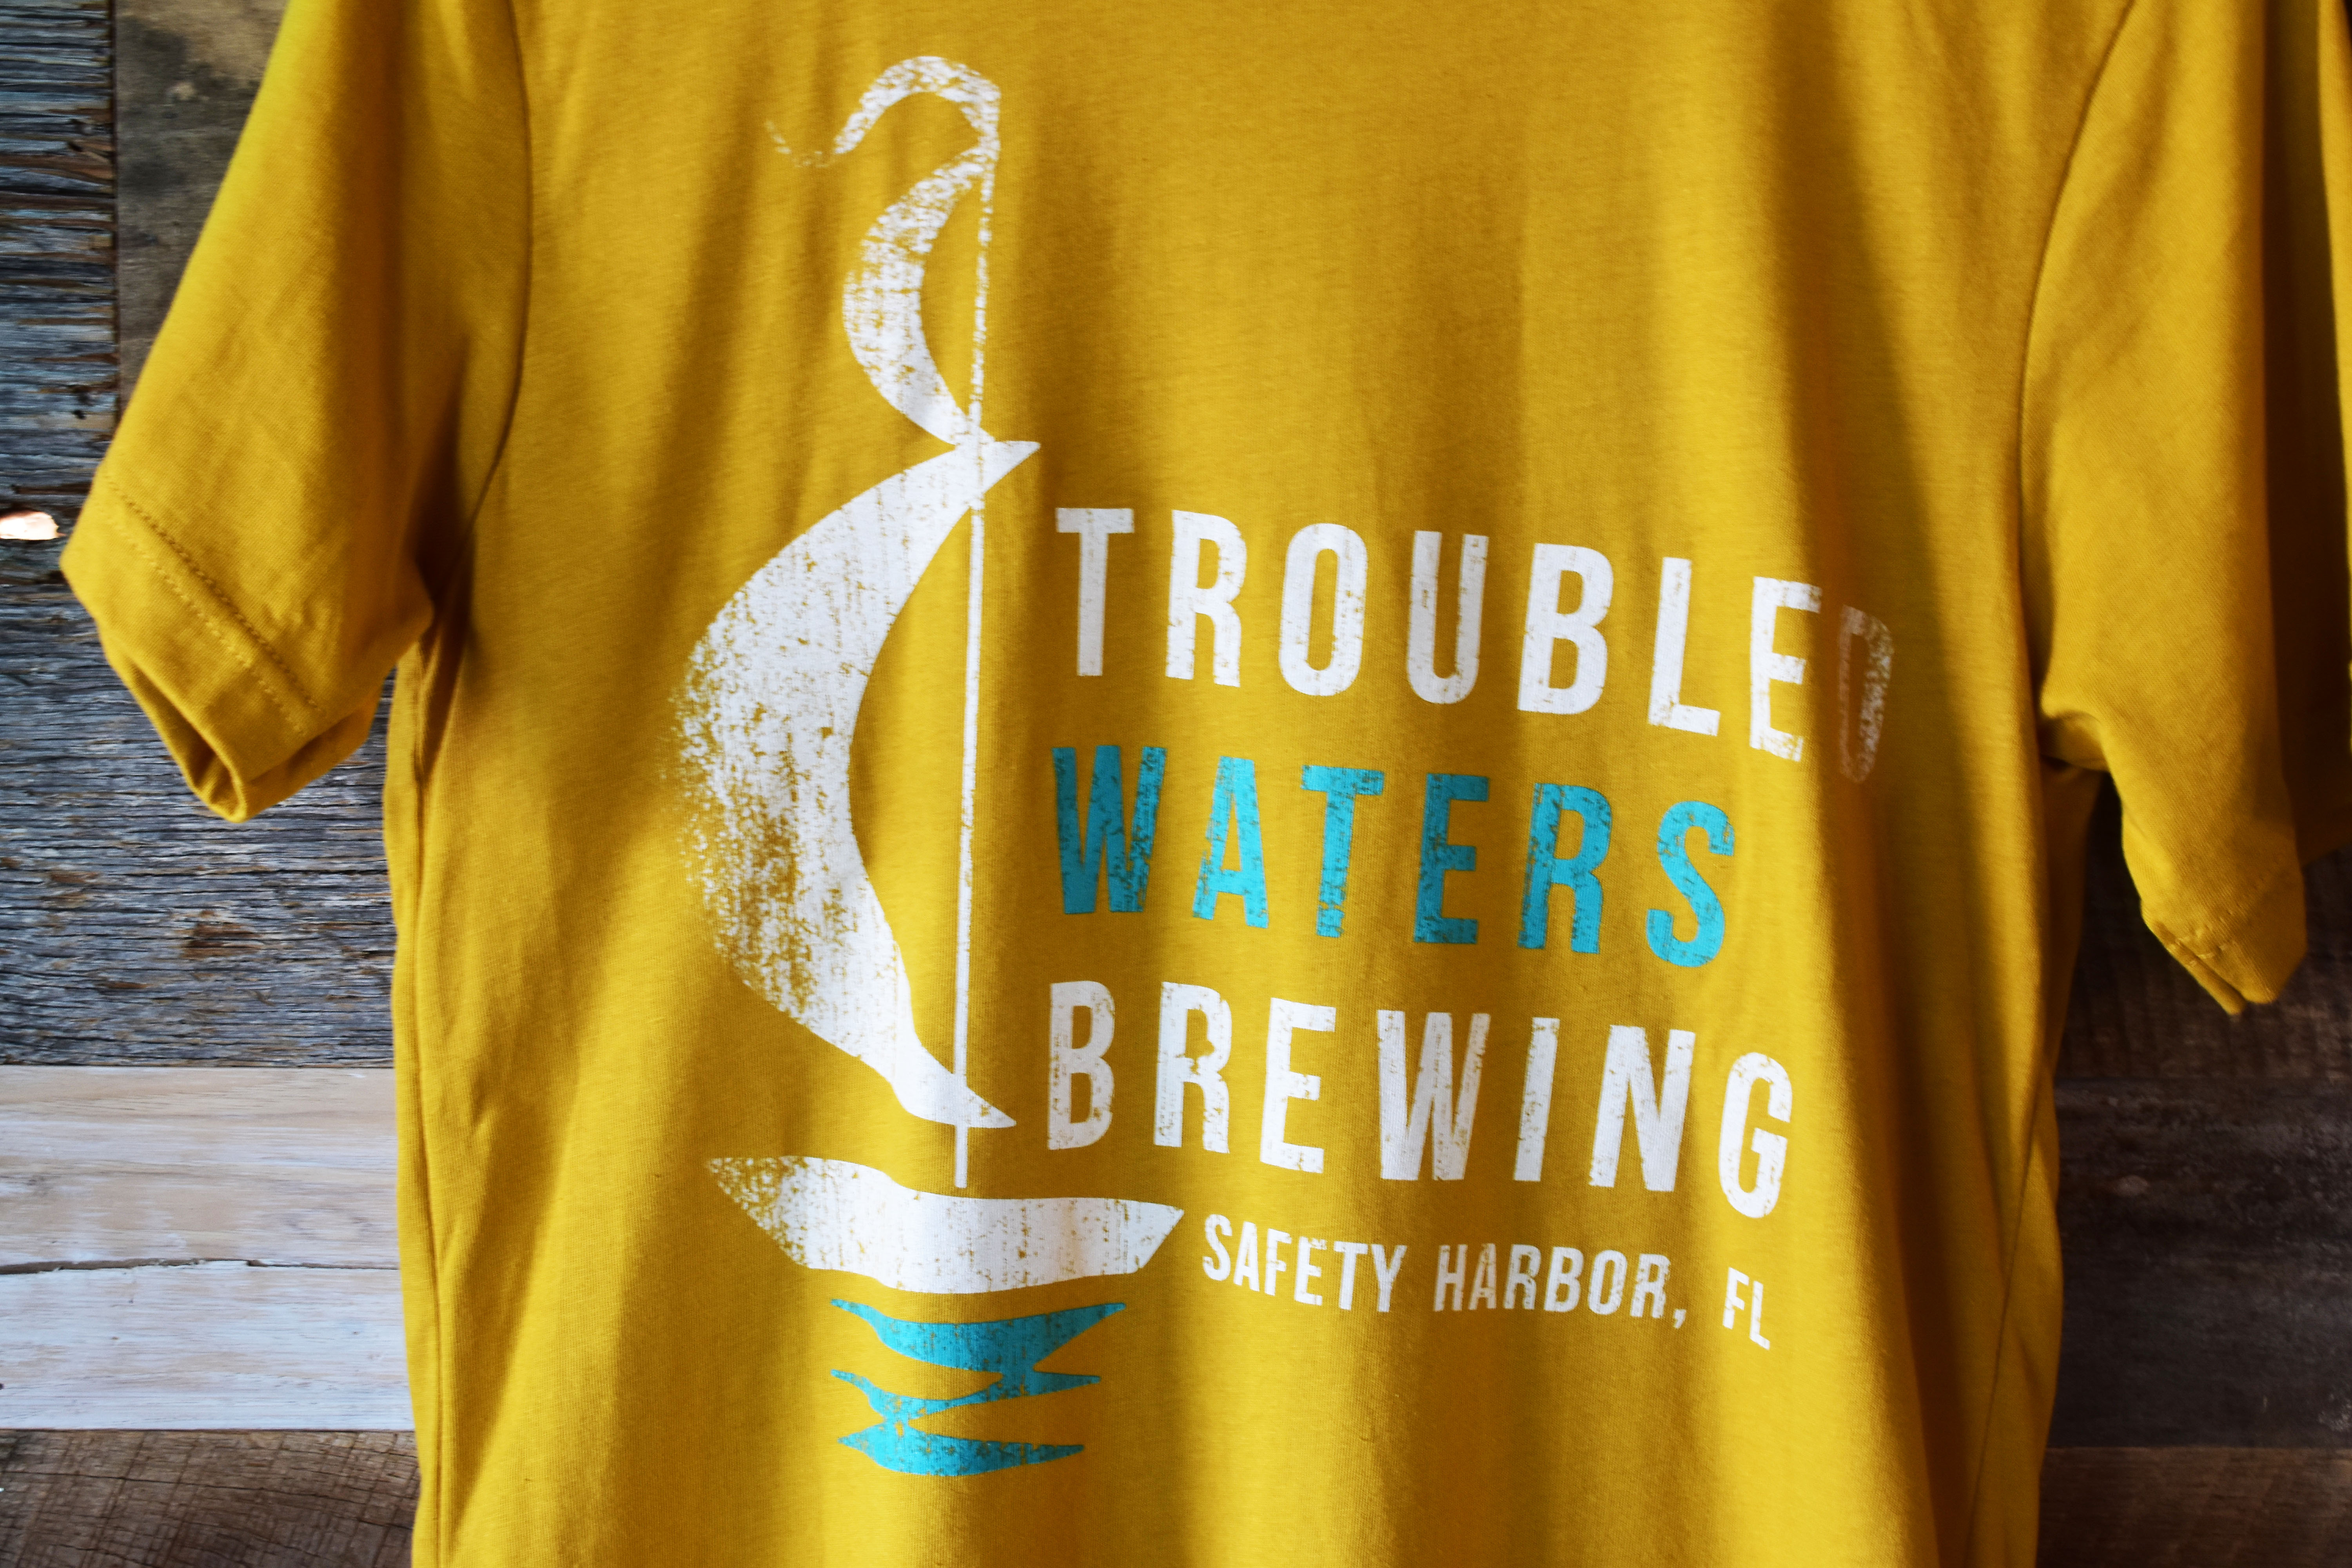 must2 – Troubled Waters Brewing